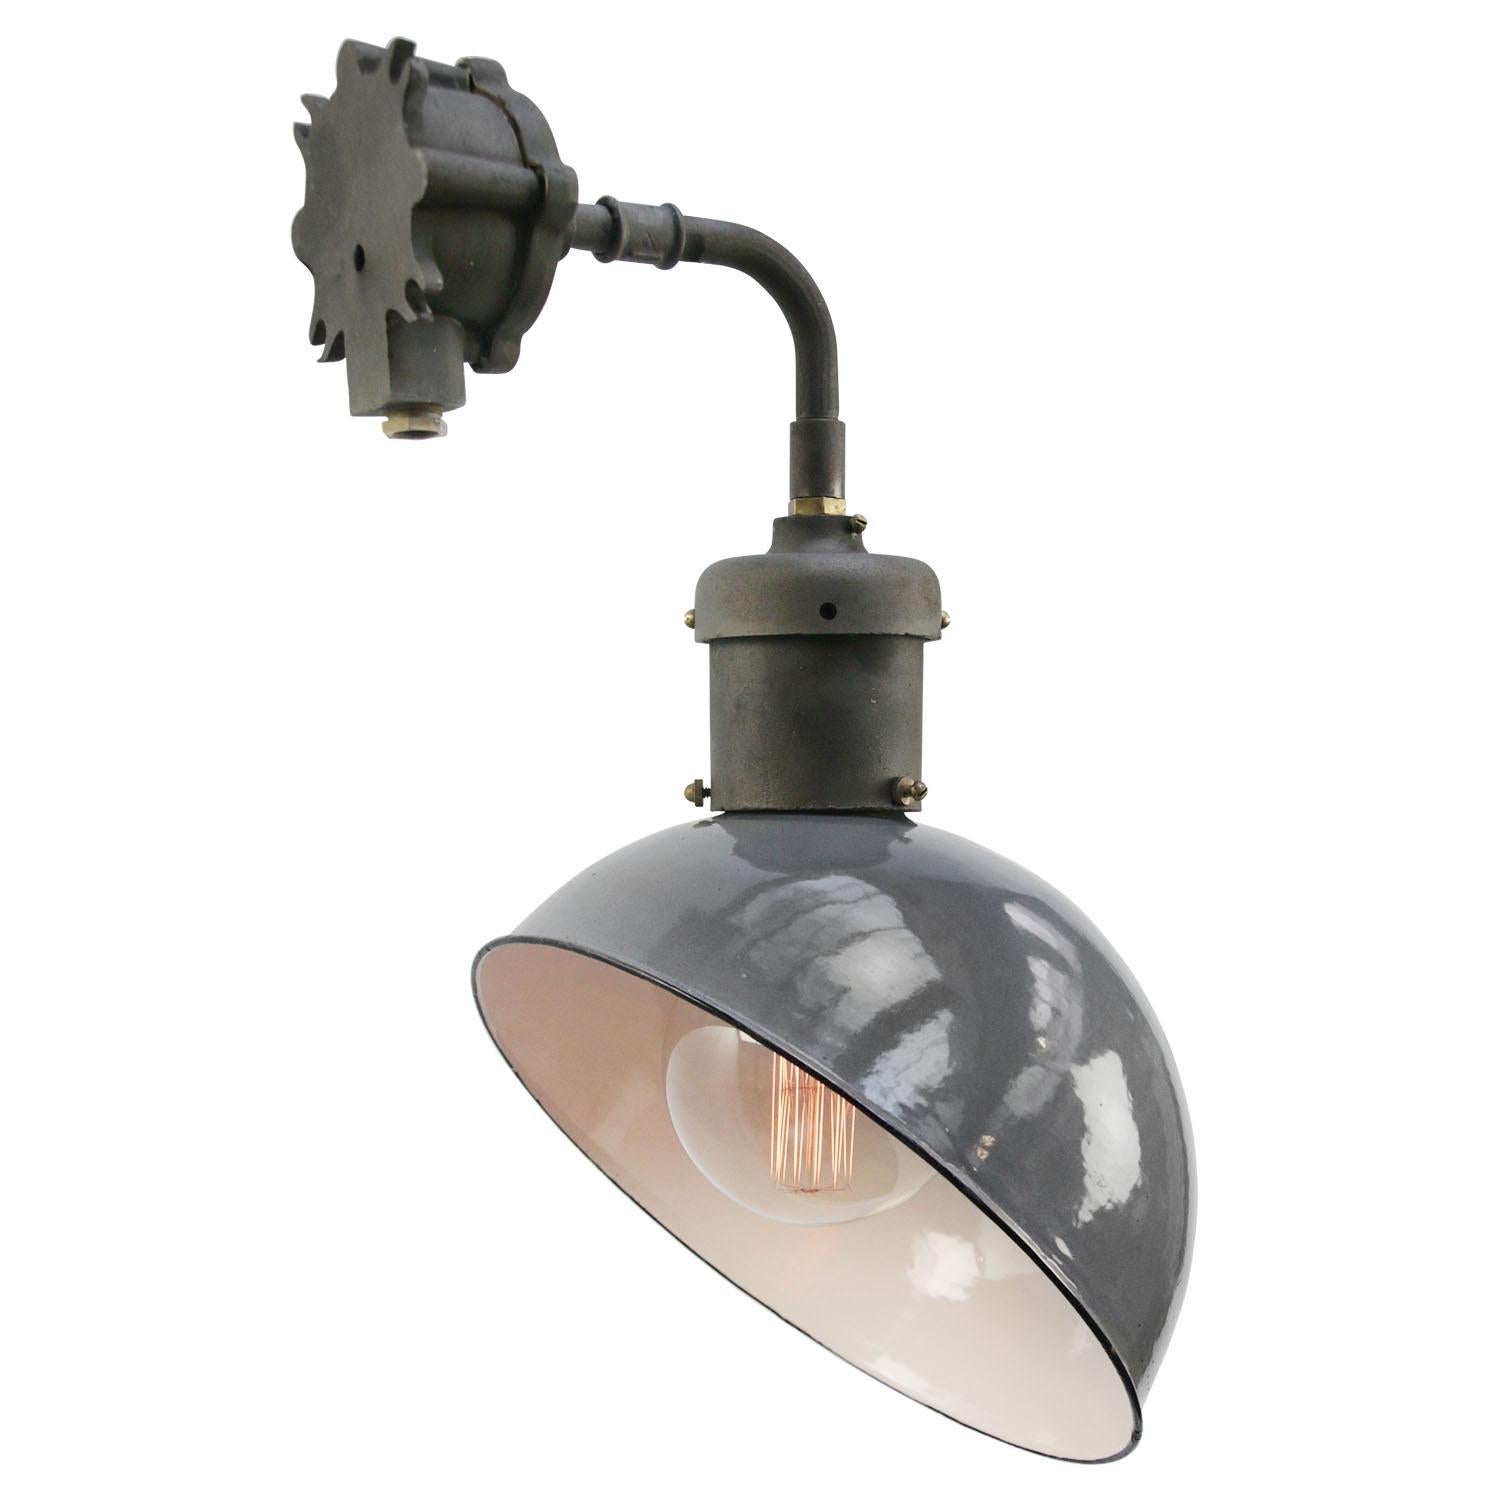 Rare Dutch Industrial asymmetric wall lamp by Industria Rotterdam
Very good original state. ± 1930
Grey enamel, cats iron wall mount with brass details

Weight: 4.00 kg / 8.8 lb

Priced per individual item. All lamps have been made suitable by